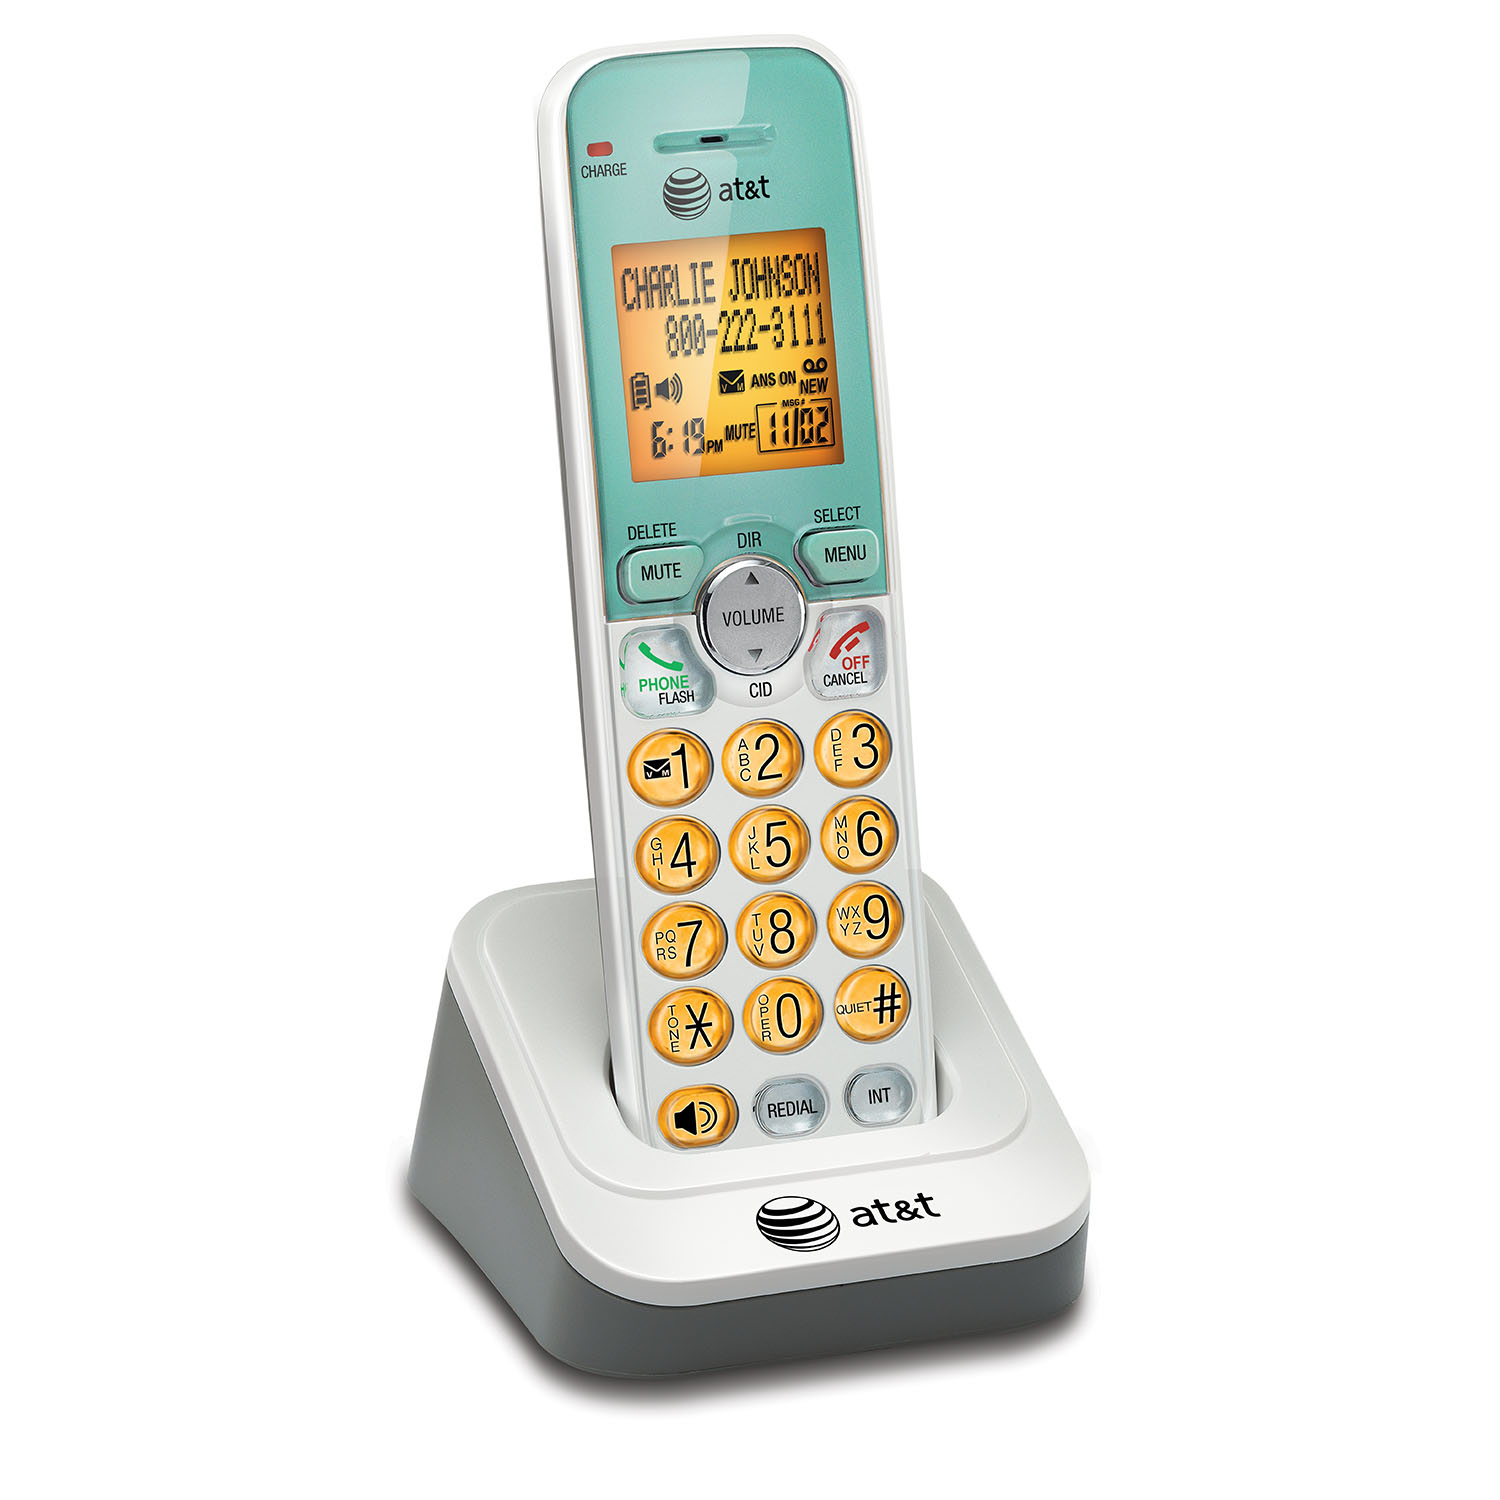 5 handset cordless answering system with caller ID/call waiting - view 7